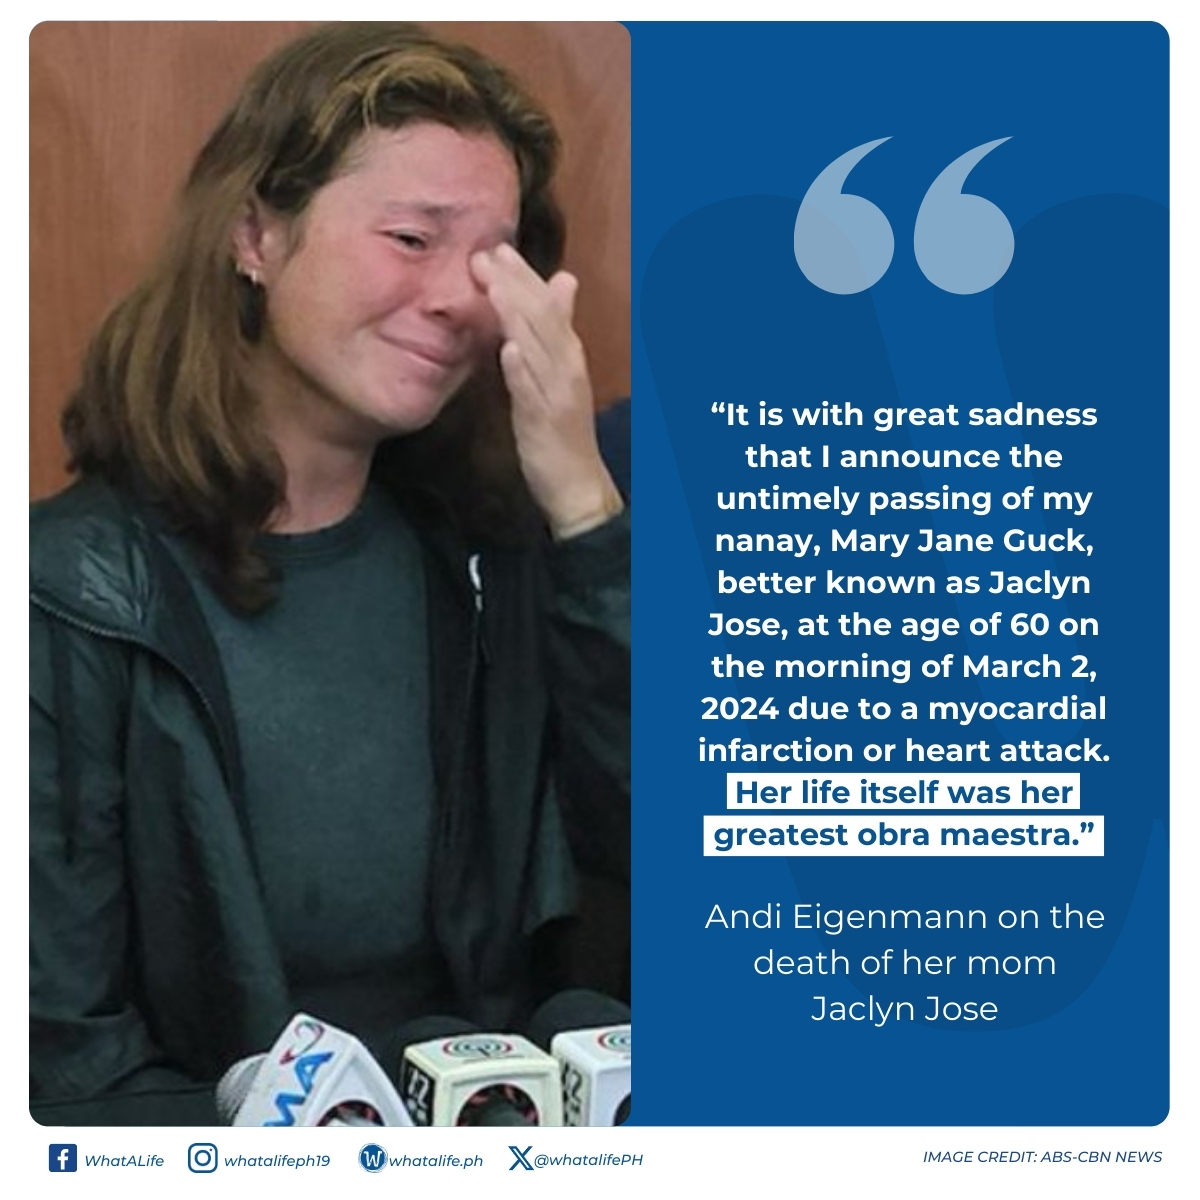 With a heavy heart, Andi Eigenmann announces the cause of her beloved mother, Jaclyn Jose's, passing.

READ full story here: whatalife.ph/andi-eigenmann…

#JaclynJose #AndiEigenmann